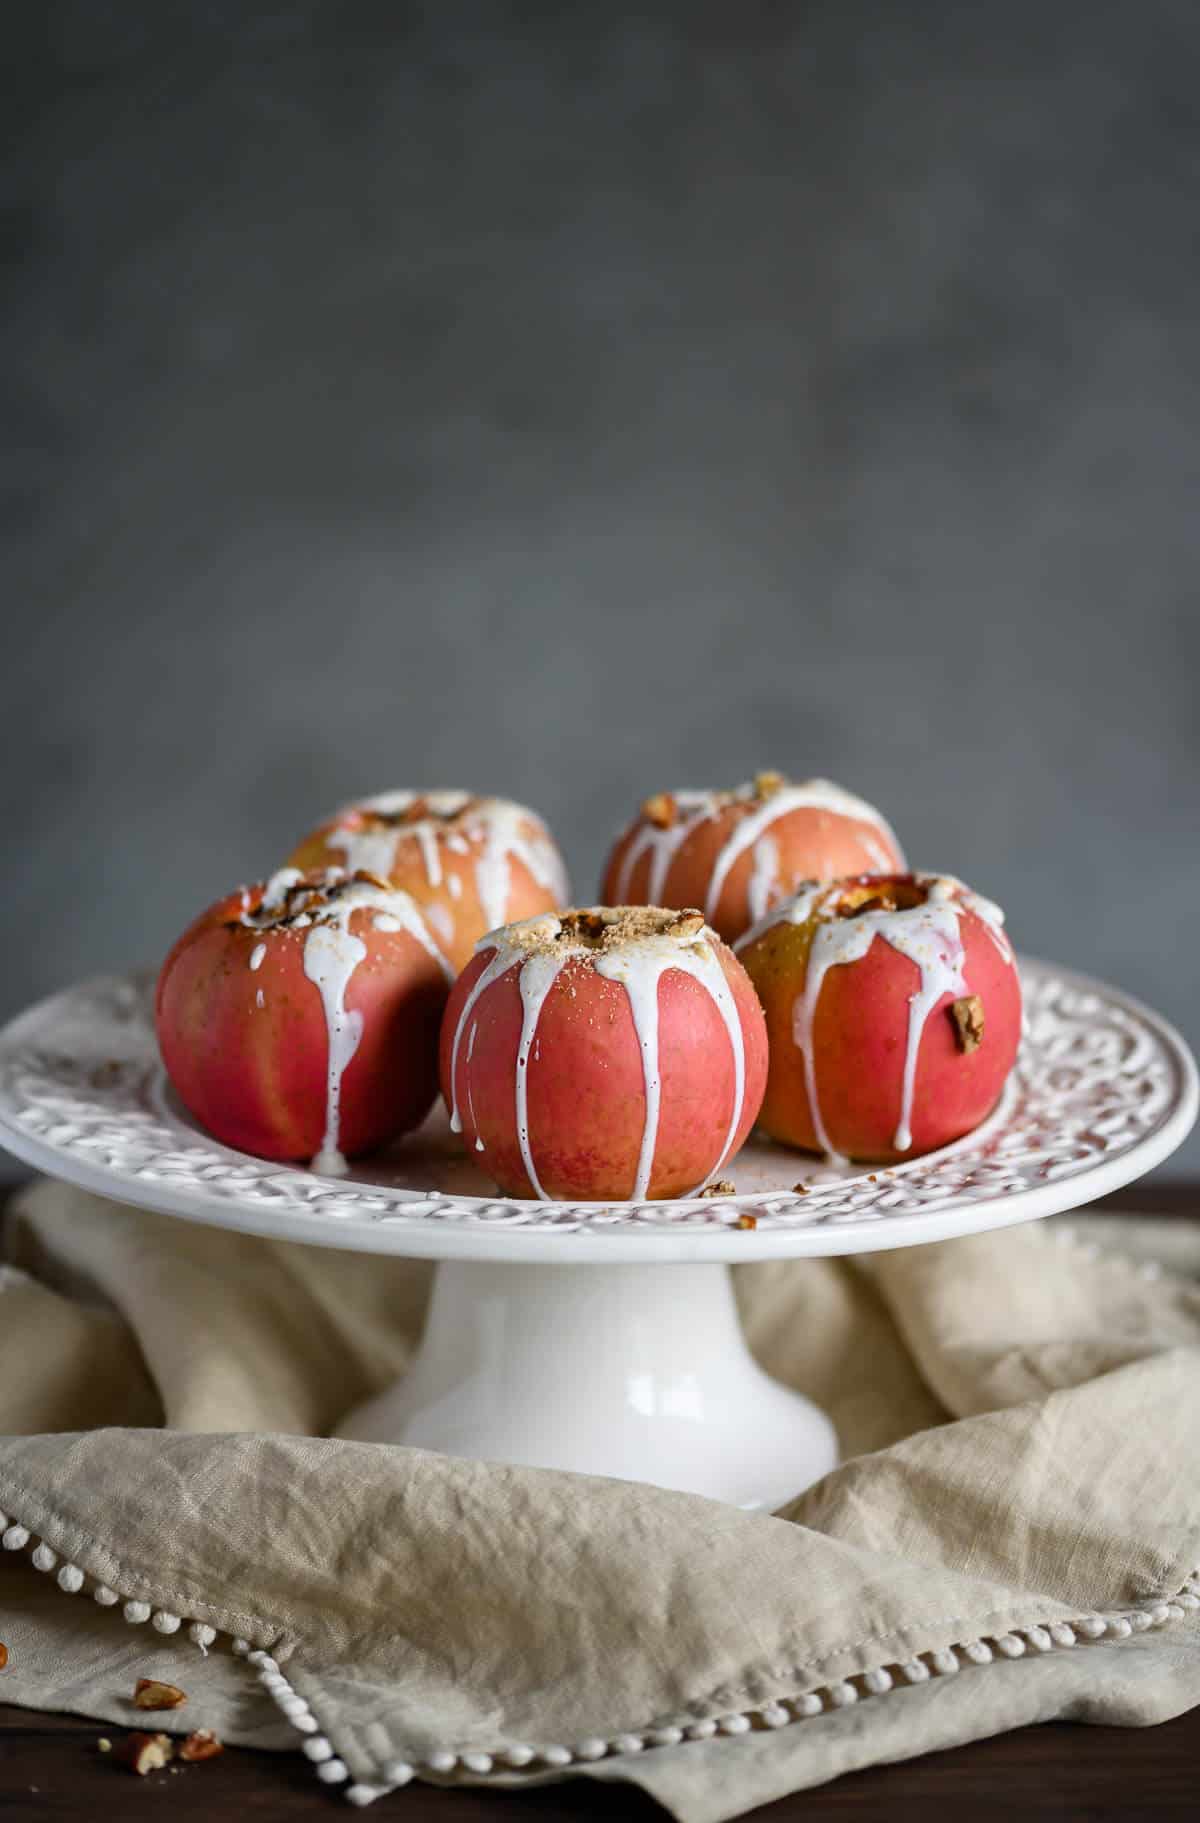 healthy baked apples drizzled with sweet yogurt sauce, pecans and cinnamon on a cake pedestal